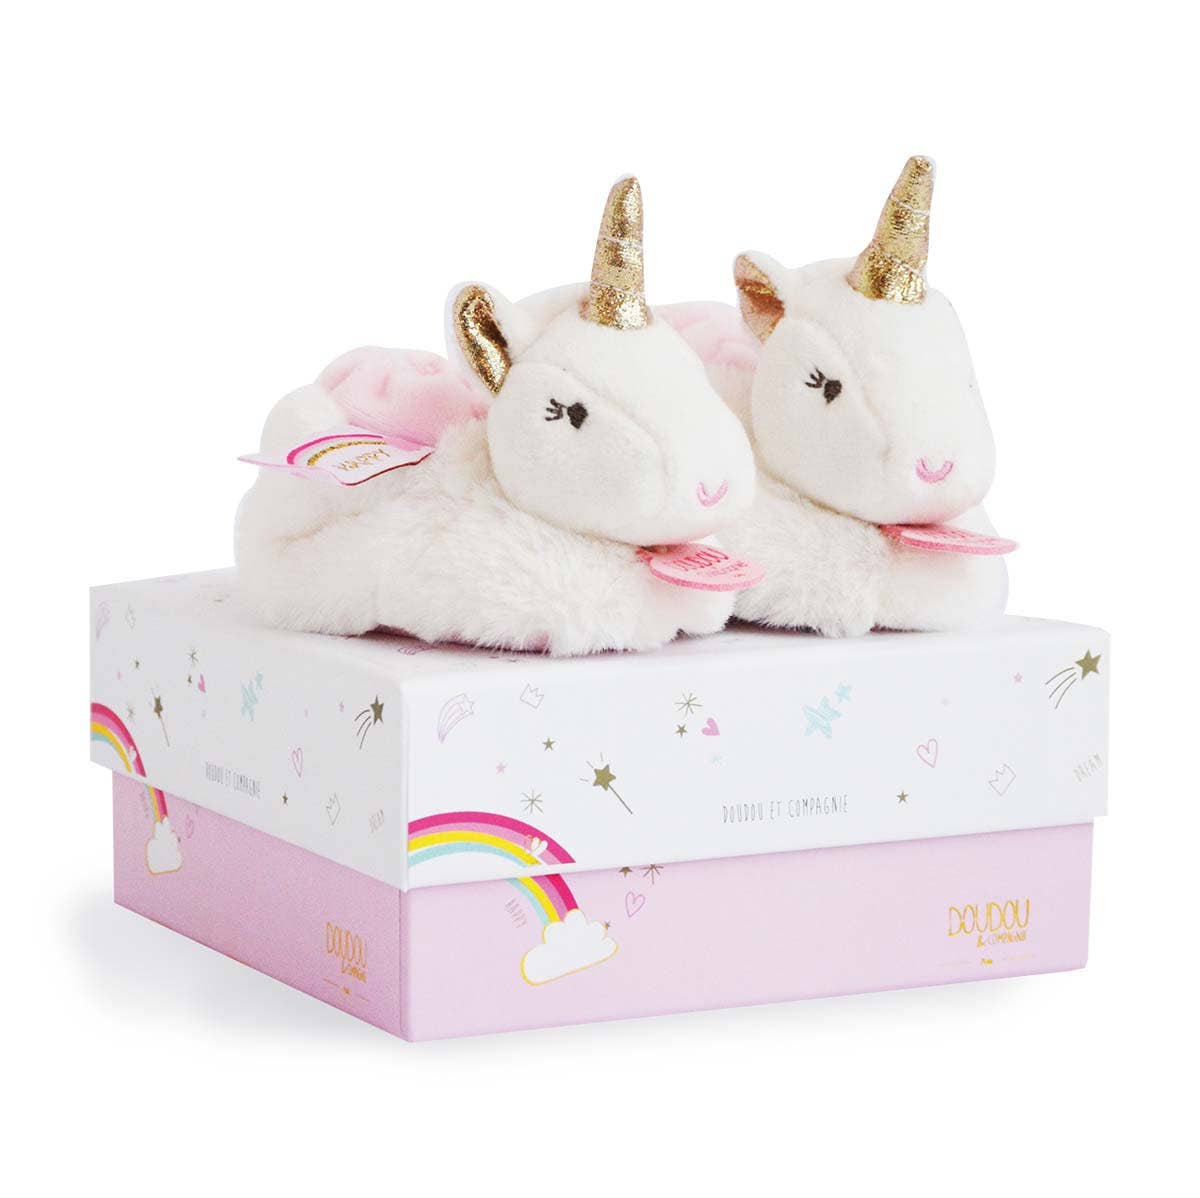 Unicorn Baby Booties with Gold Horn and Pink Details in Gift Box